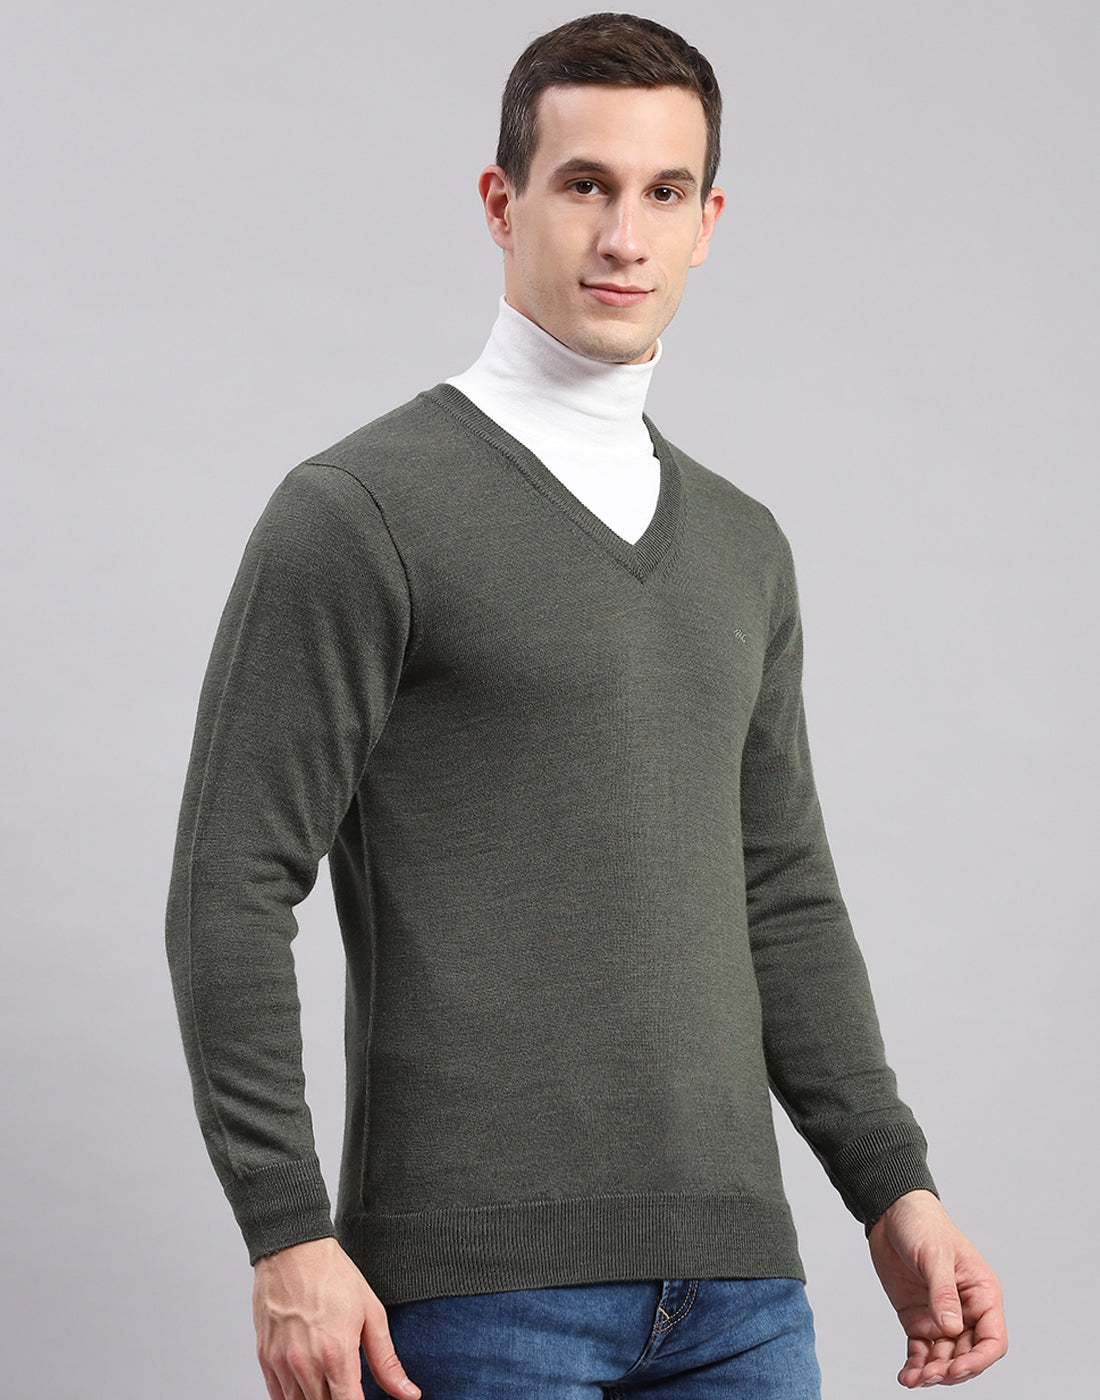 Men Olive Solid V Neck Full Sleeve Sweaters/Pullovers